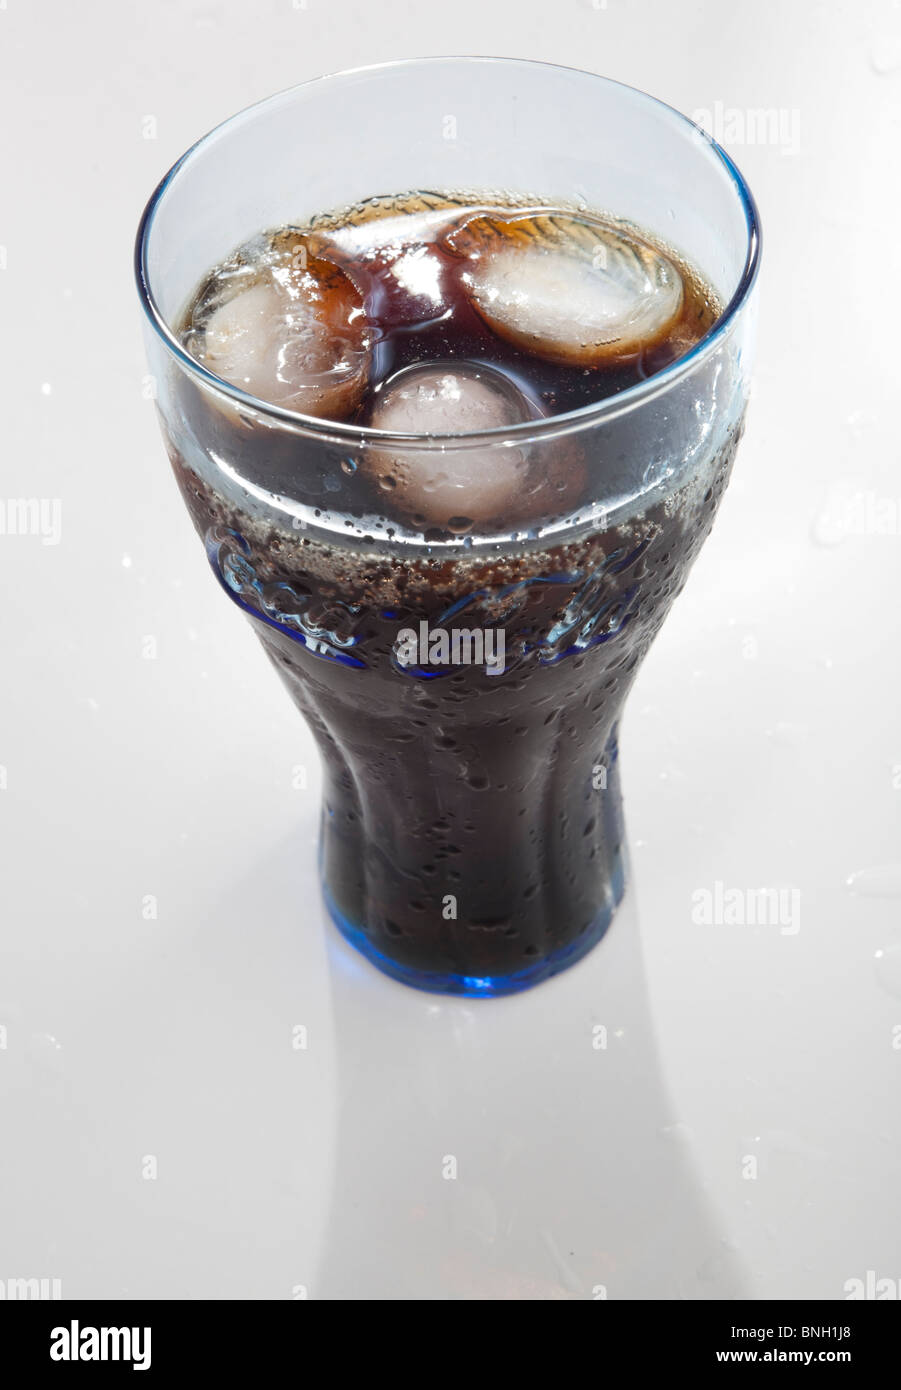 https://c8.alamy.com/comp/BNH1J8/a-glass-of-coca-cola-with-ice-cubes-cut-out-cutout-BNH1J8.jpg